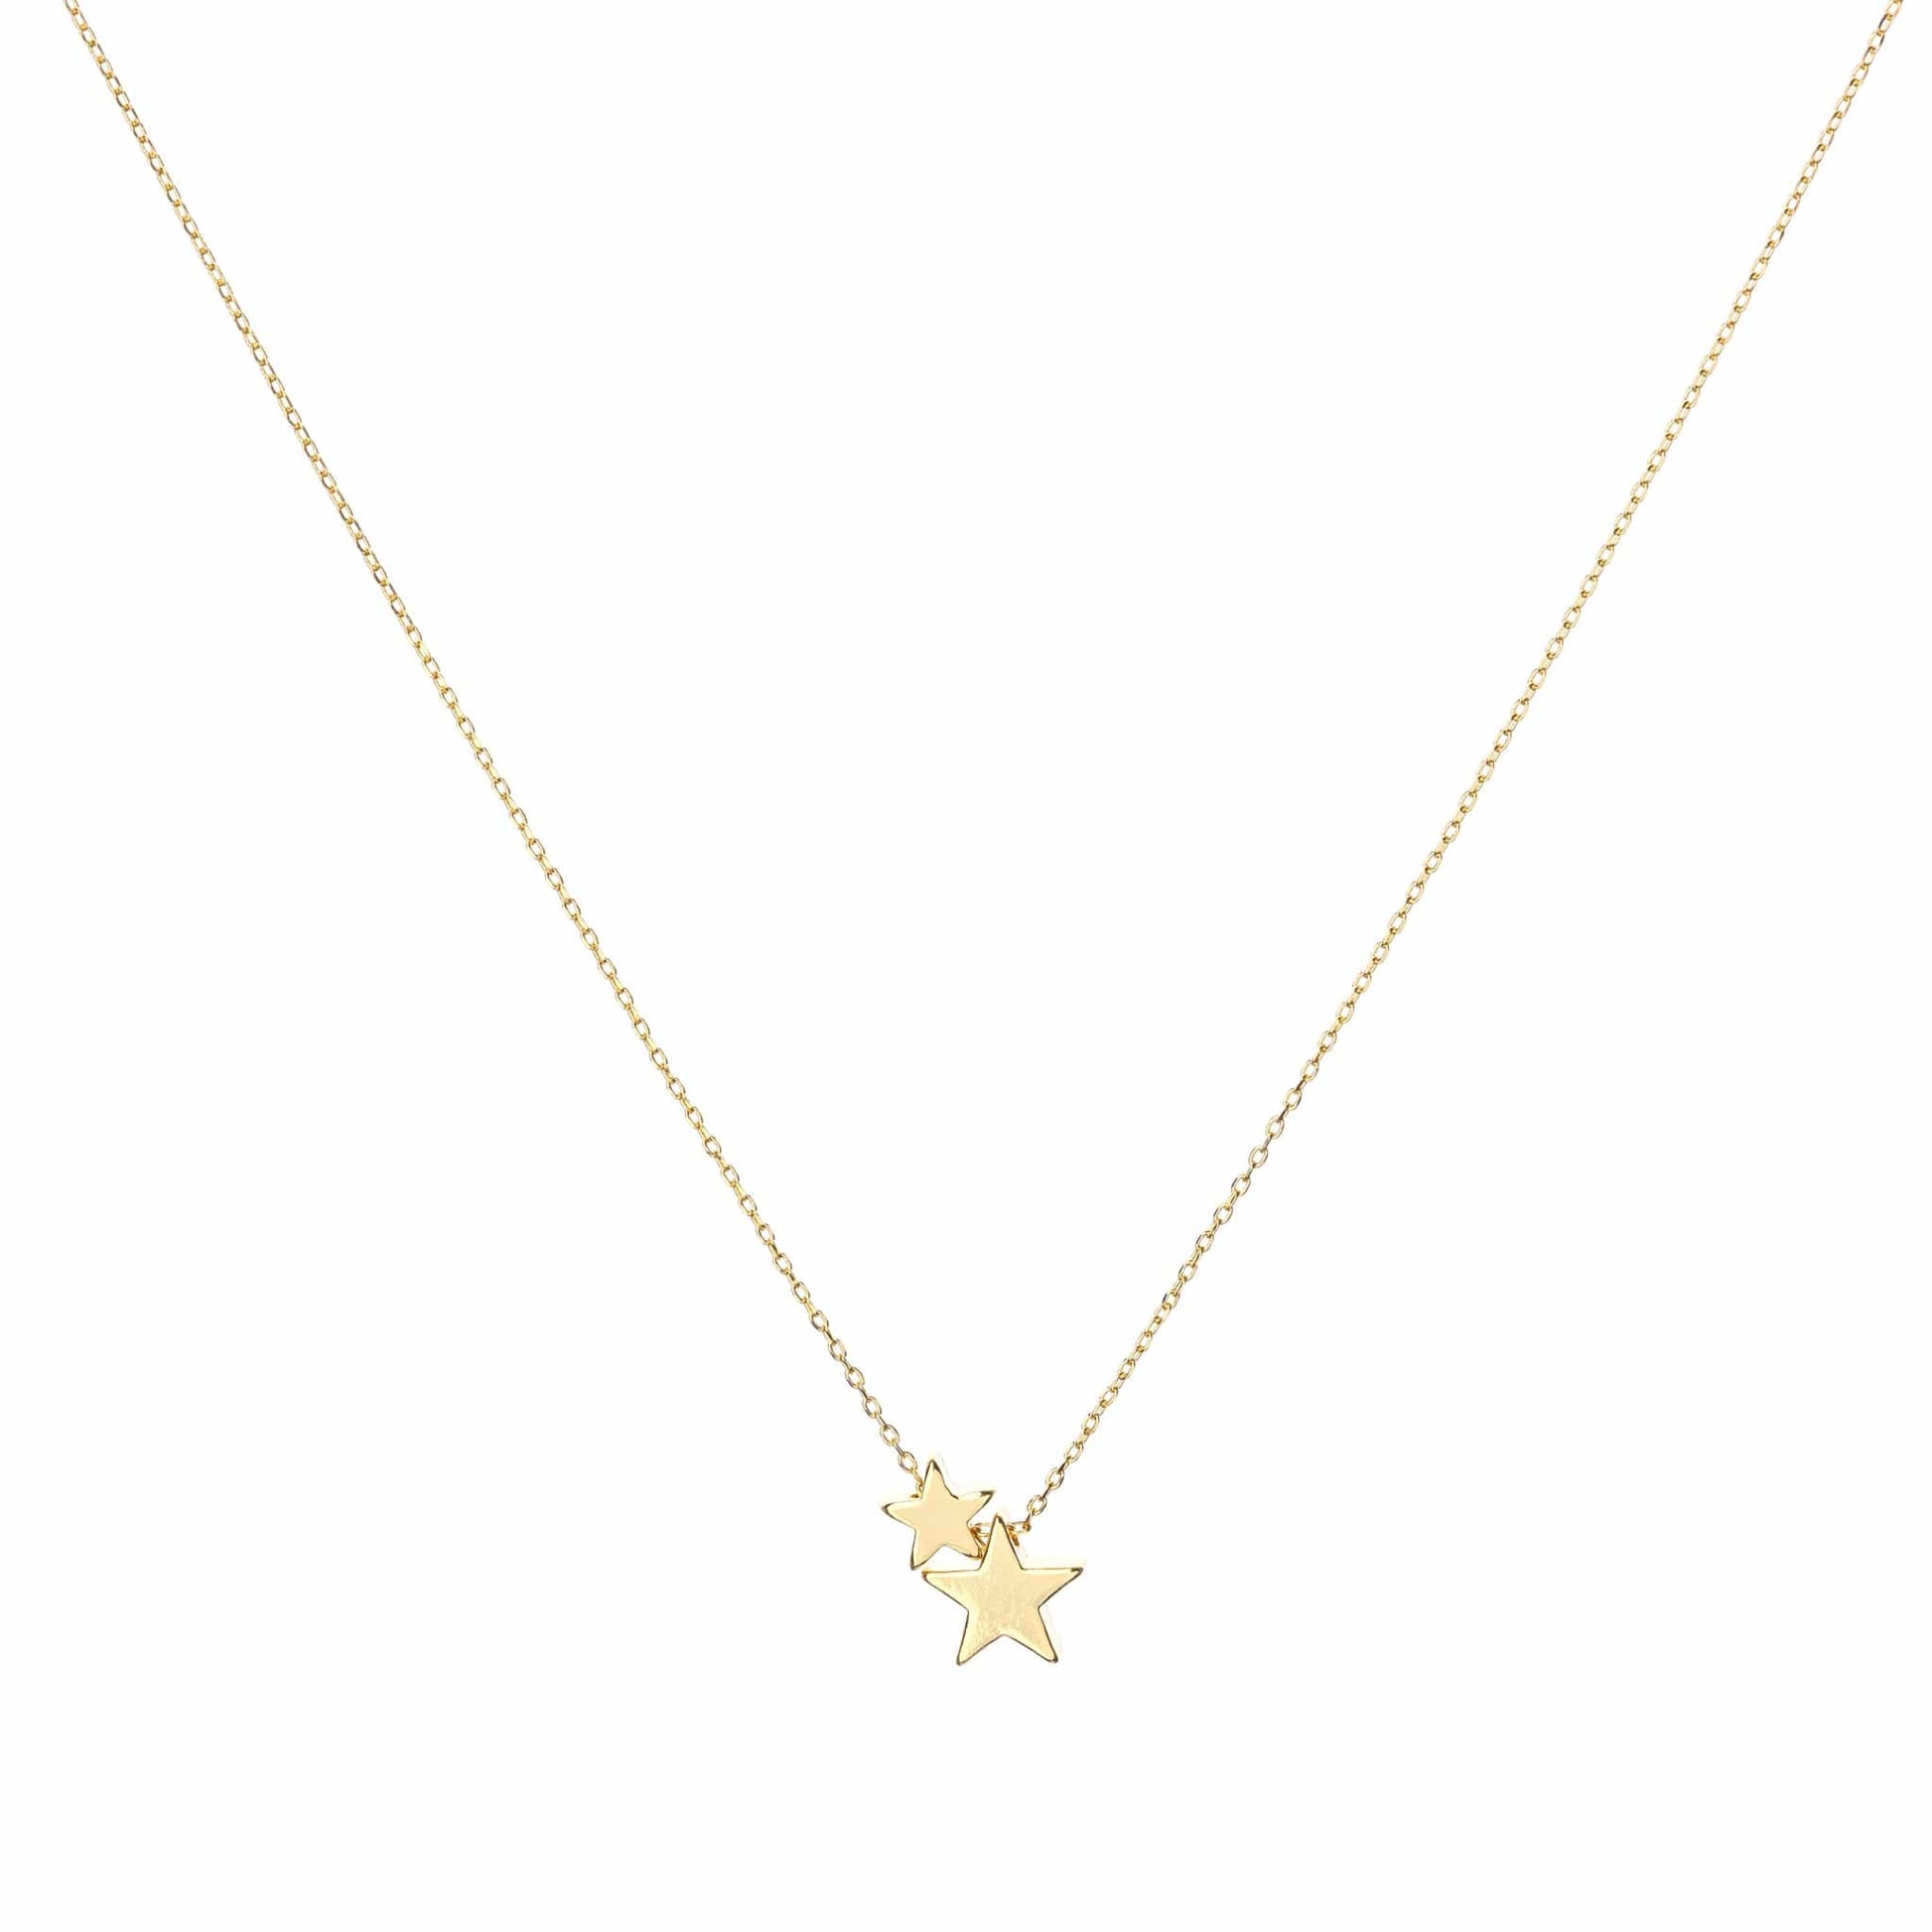 Double Star Charm Necklace gold chain